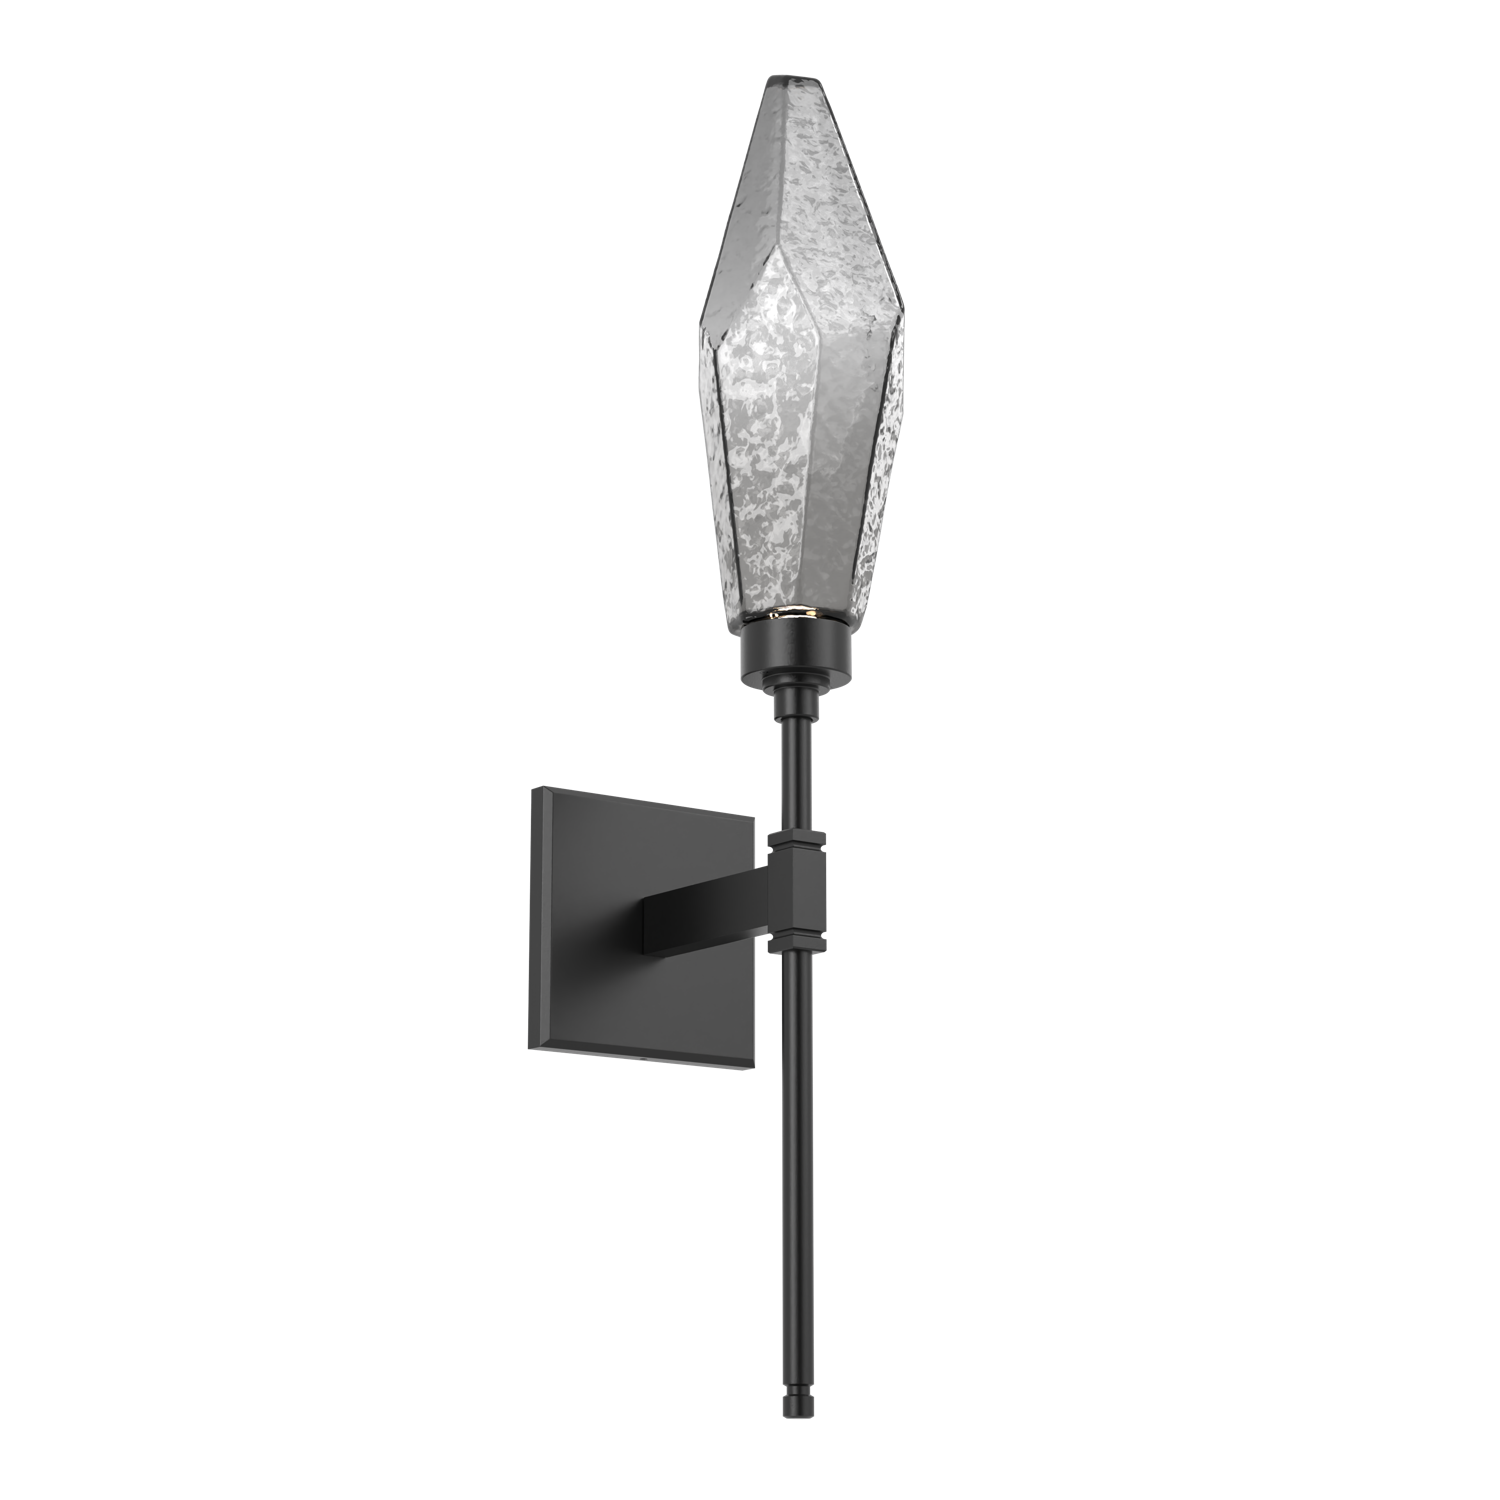 IDB0050-07-MB-CS-Hammerton-Studio-Rock-Crystal-belvedere-wall-sconce-with-matte-black-finish-and-chilled-smoke-glass-shades-and-LED-lamping